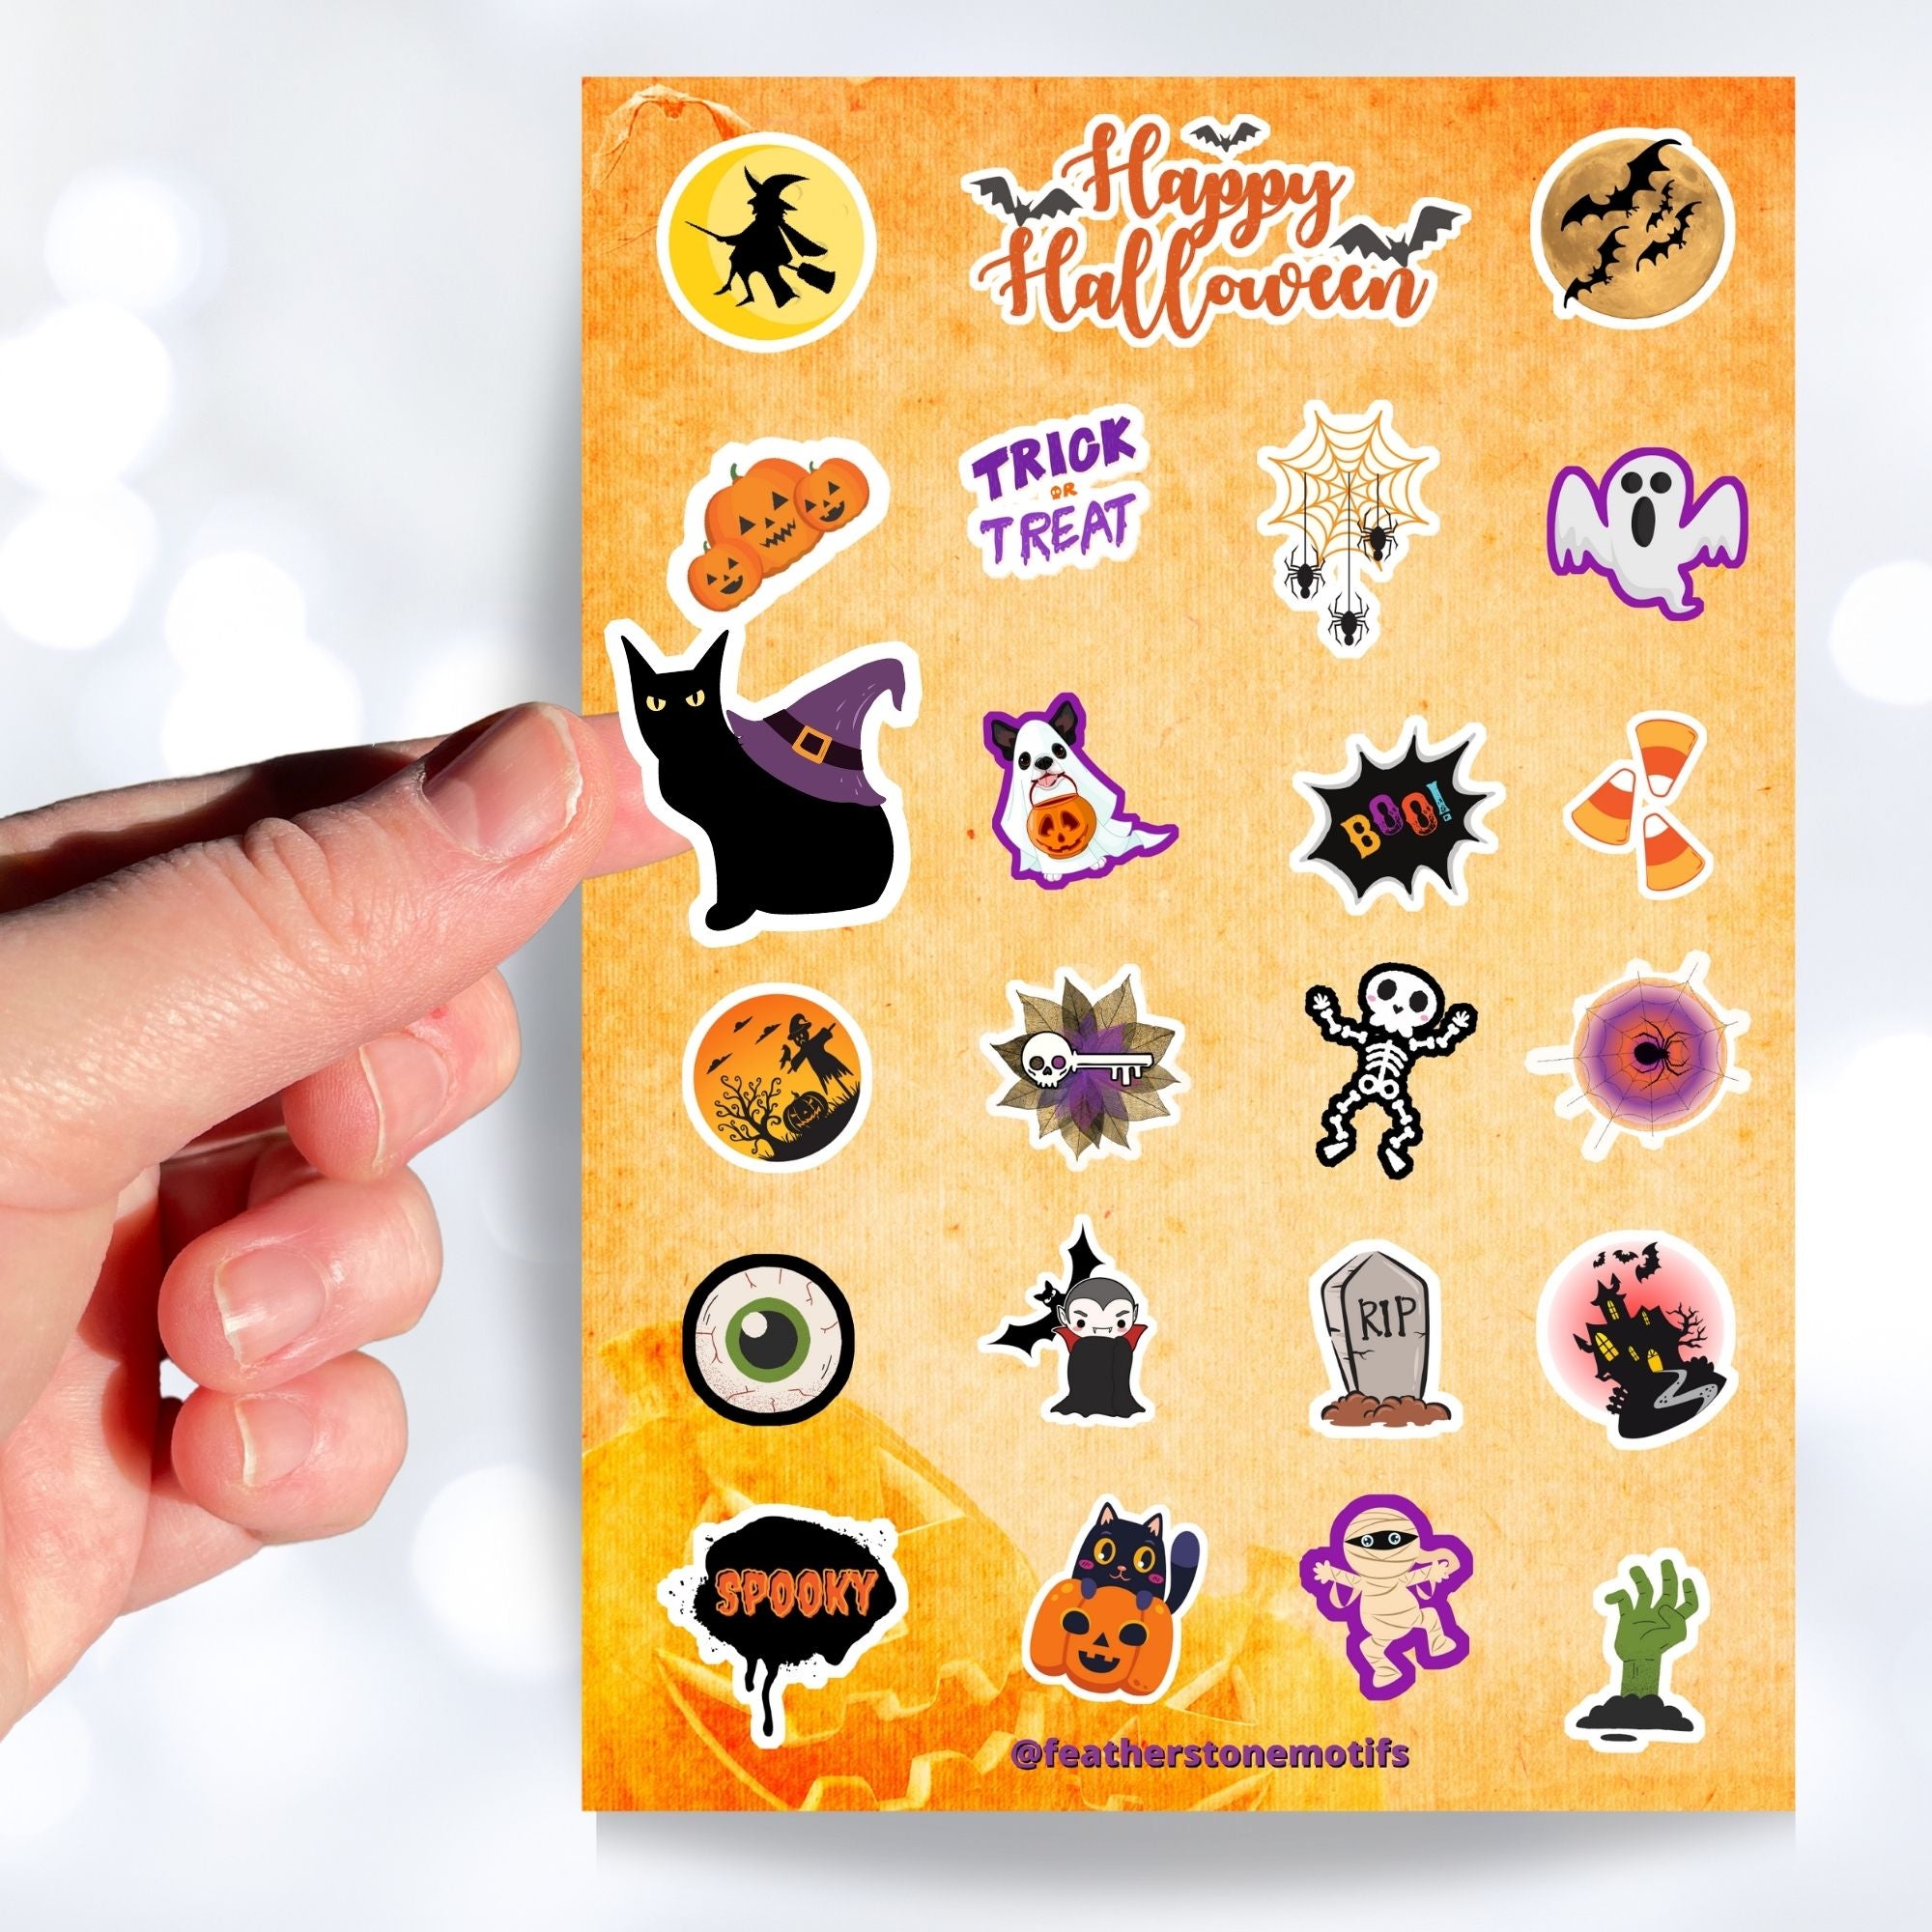 Ghosts, skeletons, black cats, and spiders; this spooky but fun sticker sheet is perfect for your Halloween decorating! This image shows a hand holding a sticker of a black cat with a witches had on it's back over the sticker sheet.